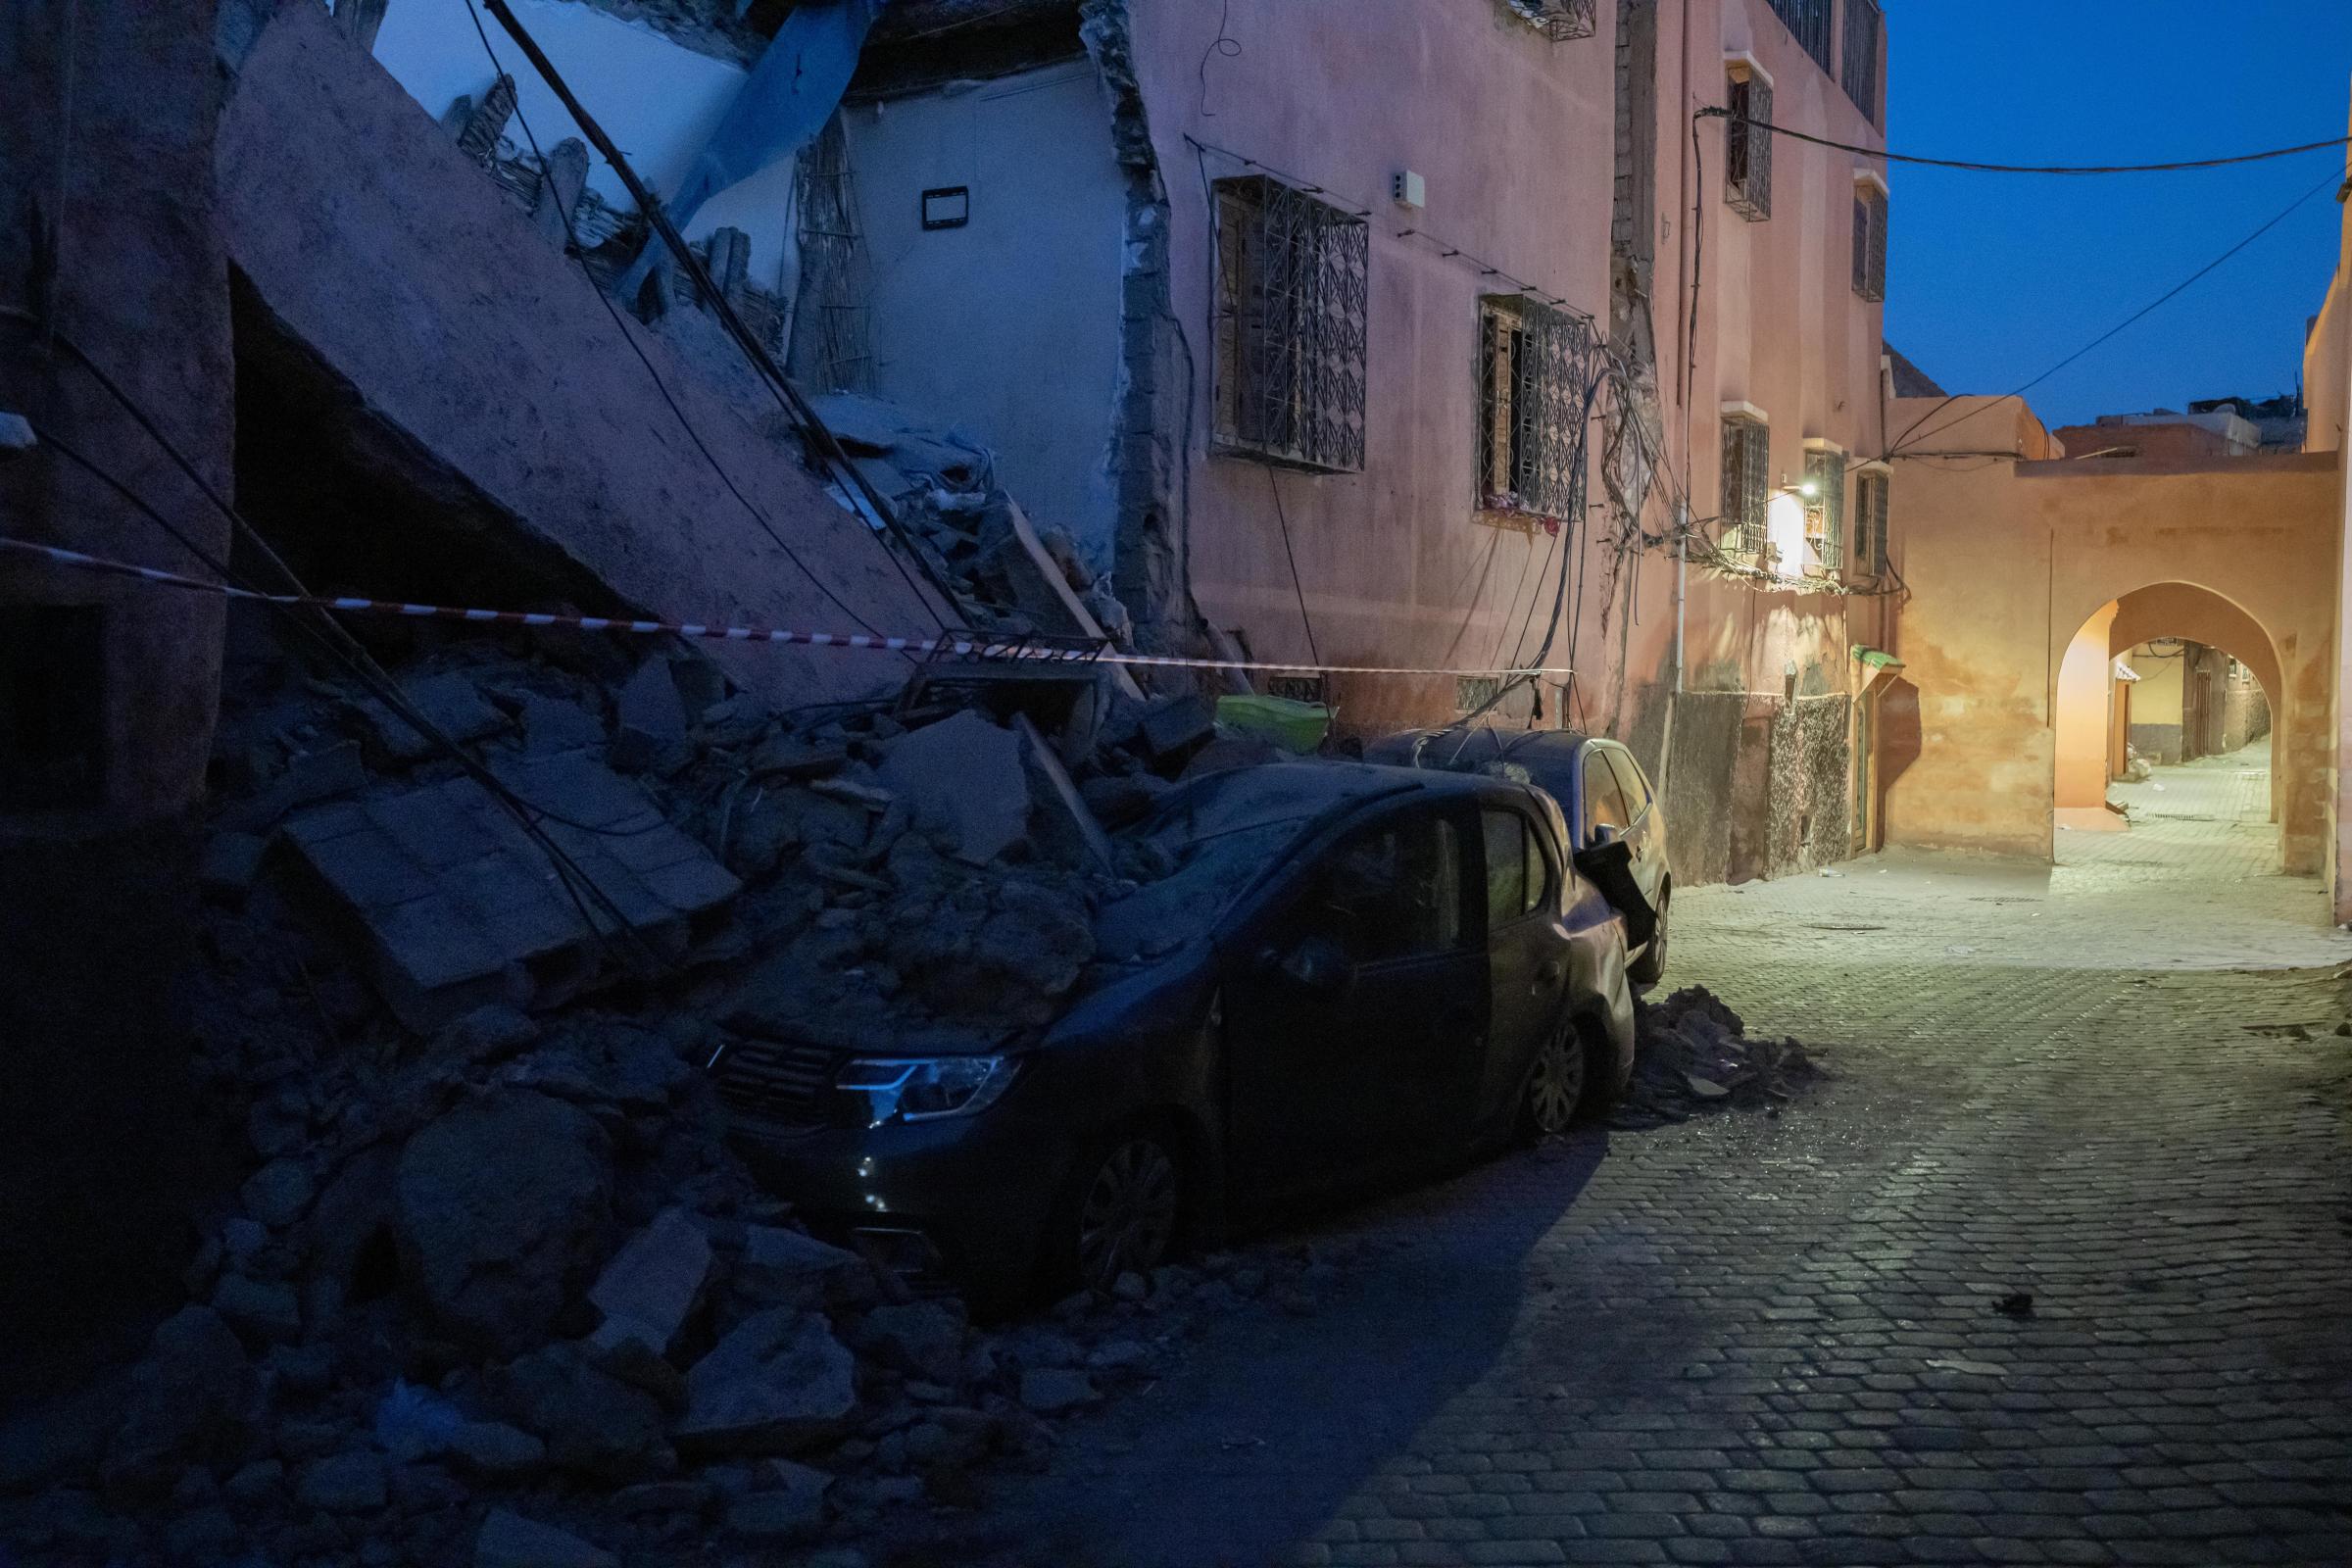 Morocco Earthquake - Rubble on vehicles damaged by a deadly earthquake, in the...